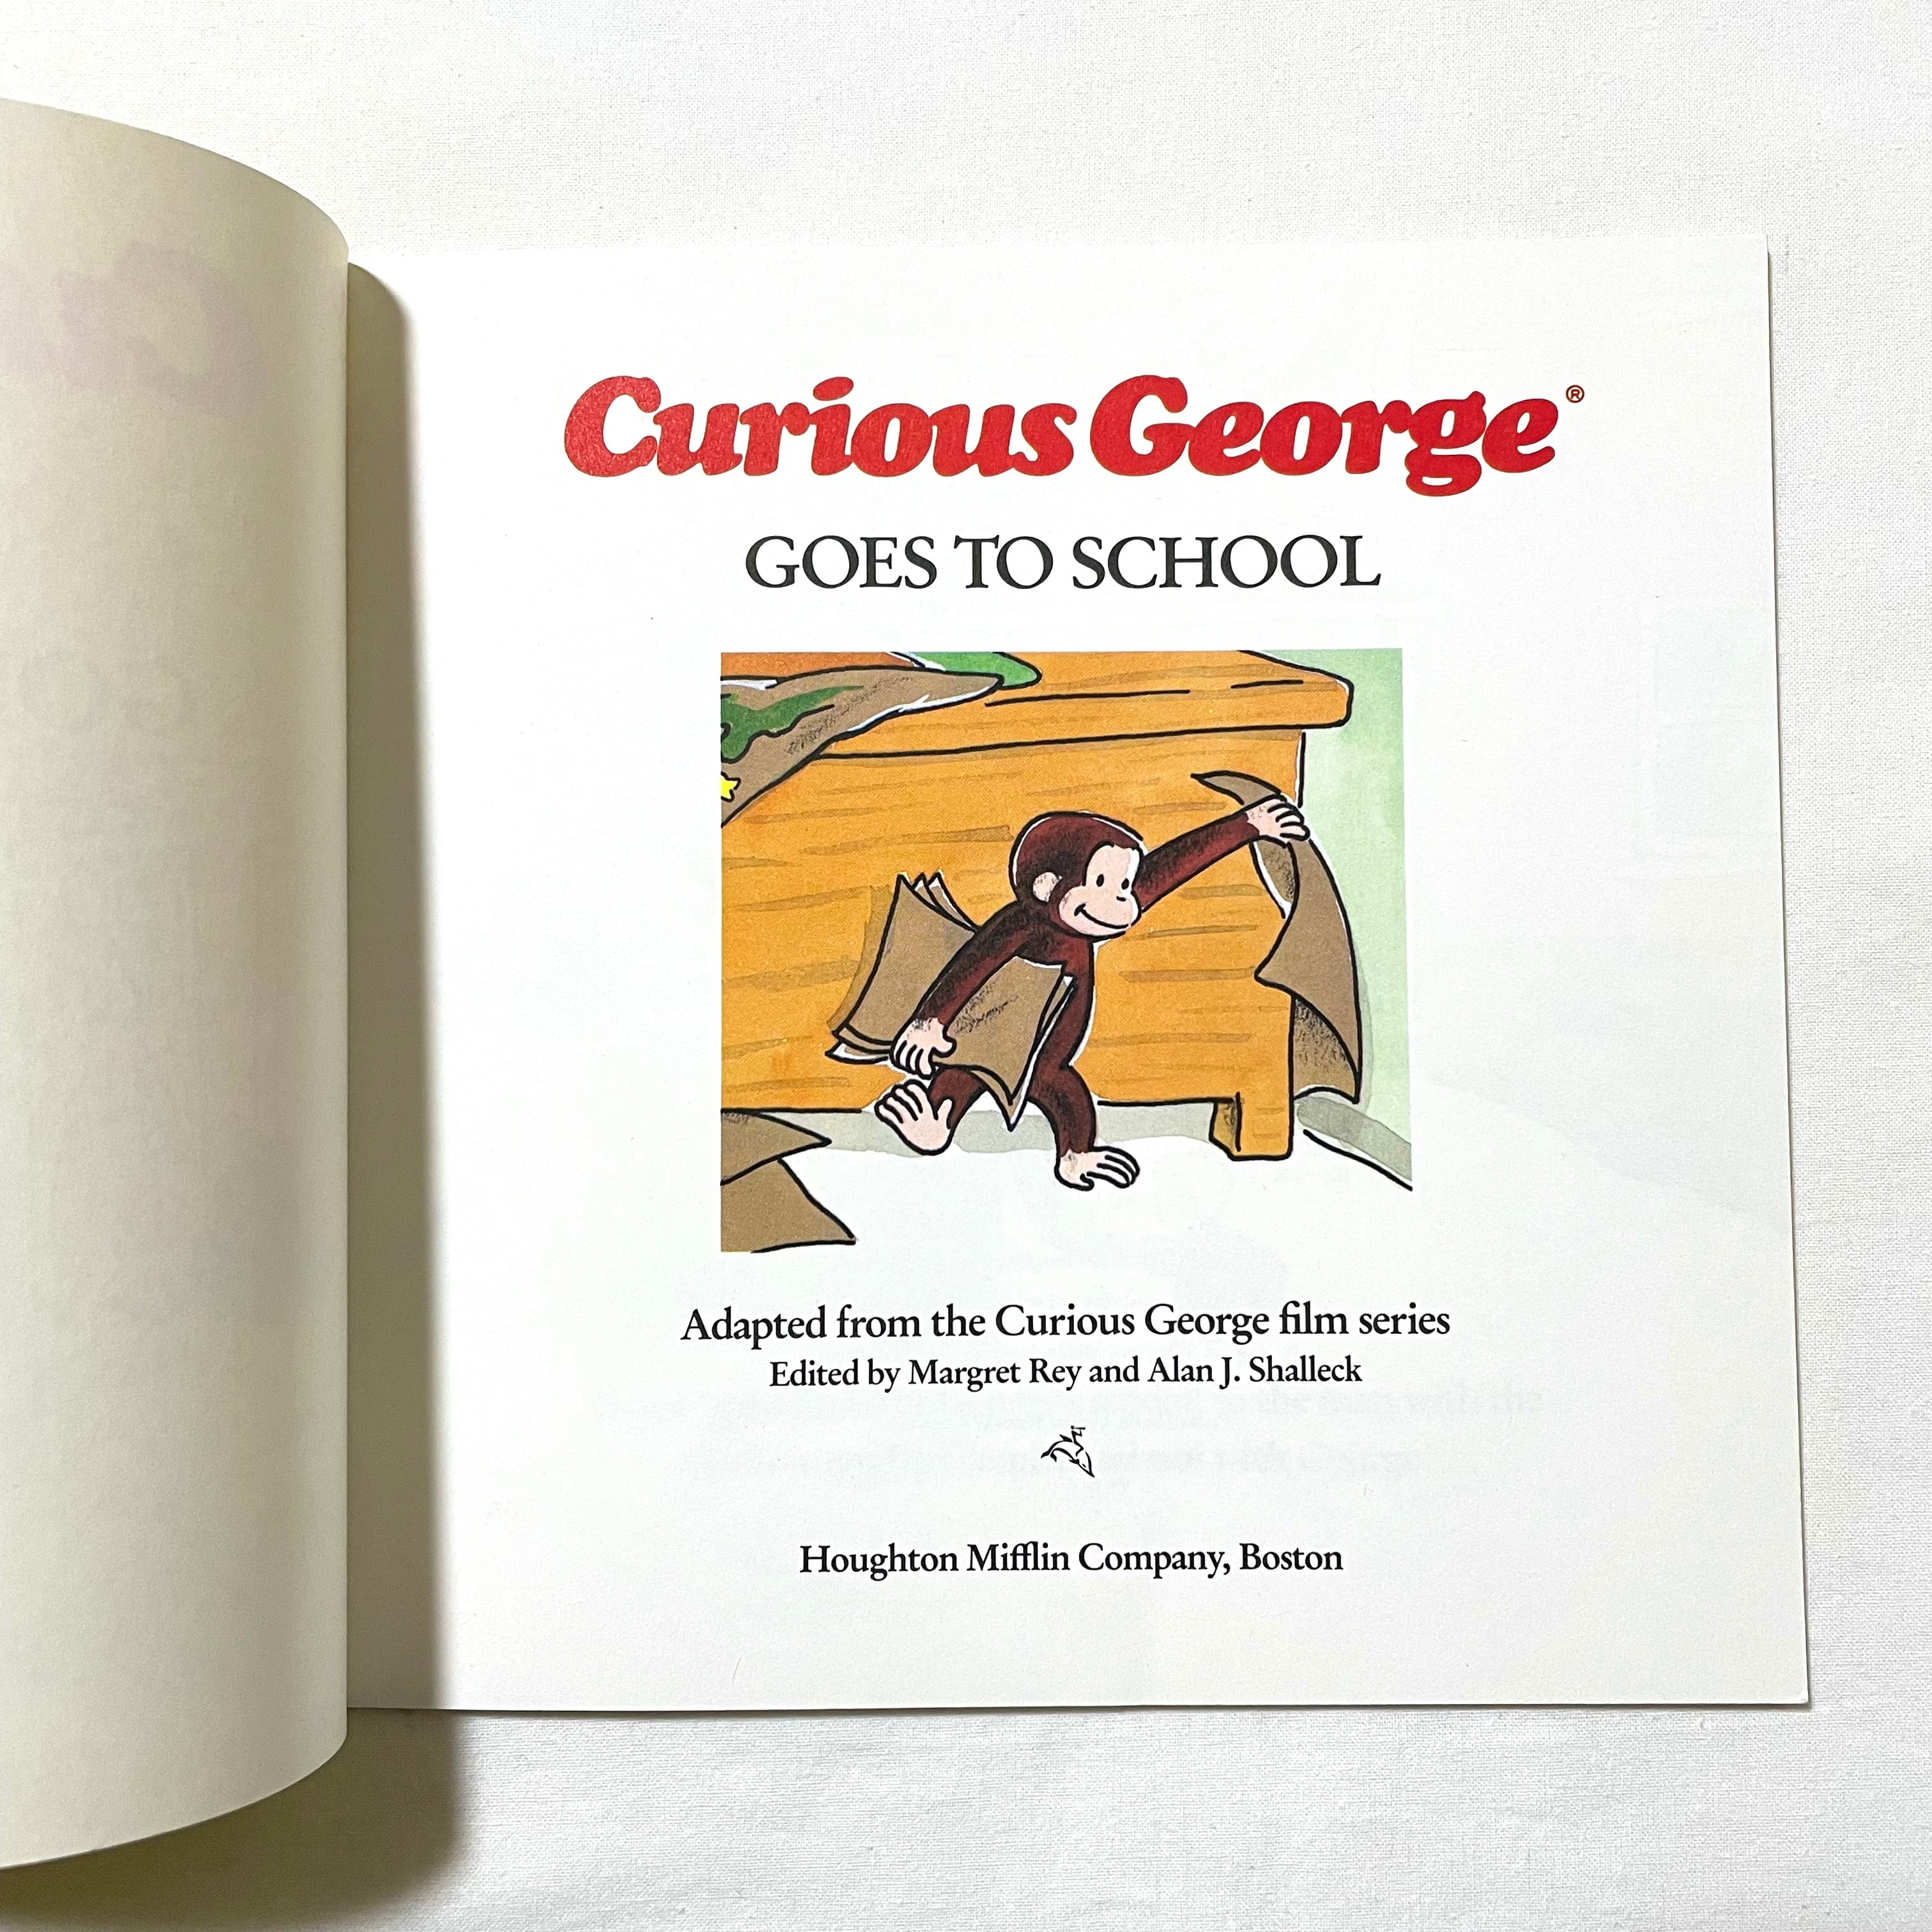 CURIOUS GEORGE GOES TO SCHOOL